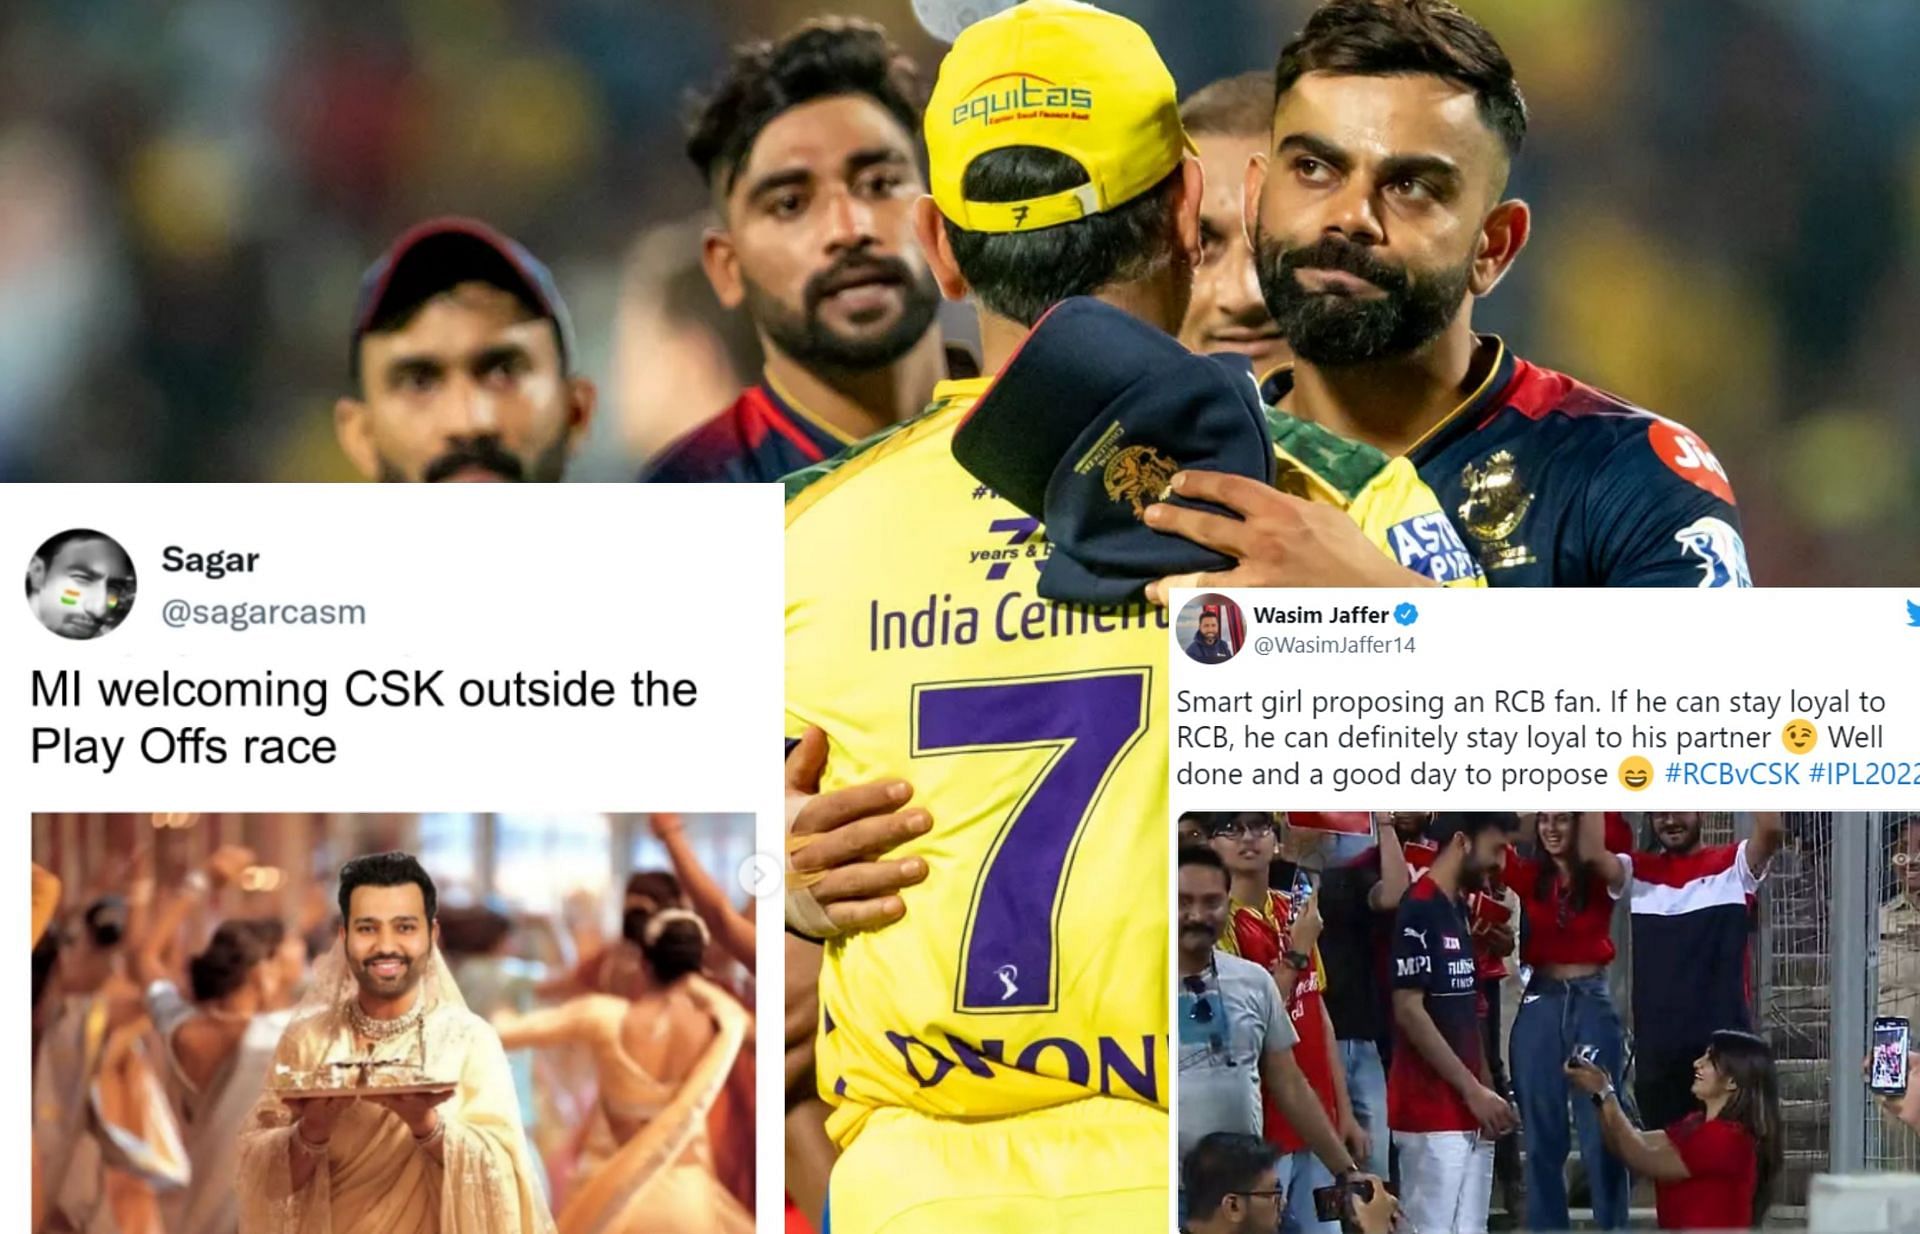 CSK vs RCB memes, IPL 2022: Top 10 funny memes from the latest match